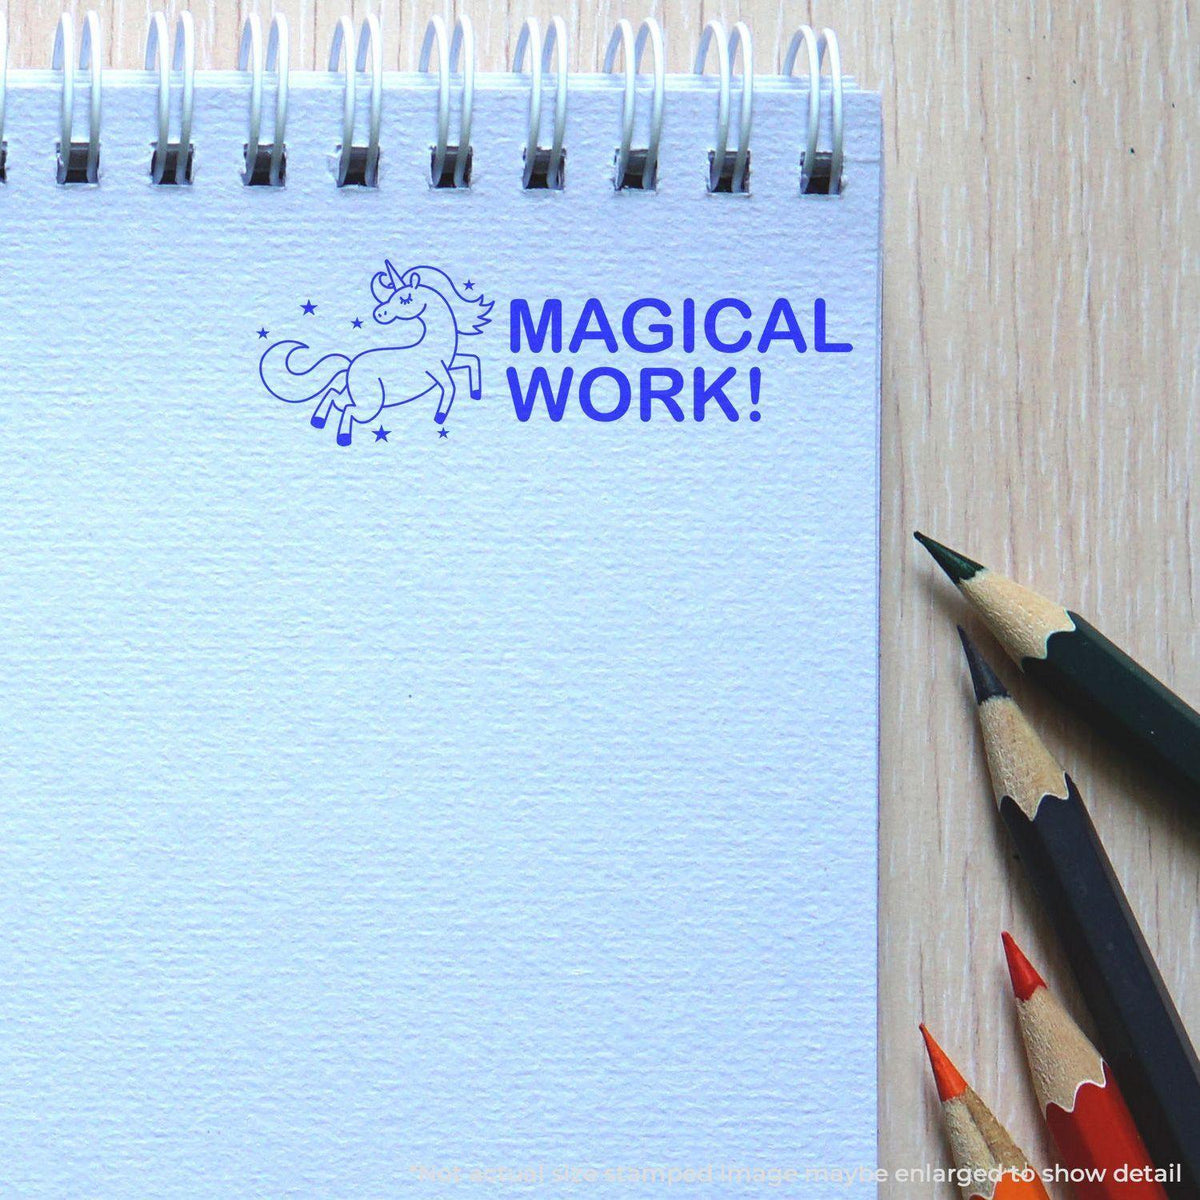 In Use Large Magical Work Rubber Stamp Image